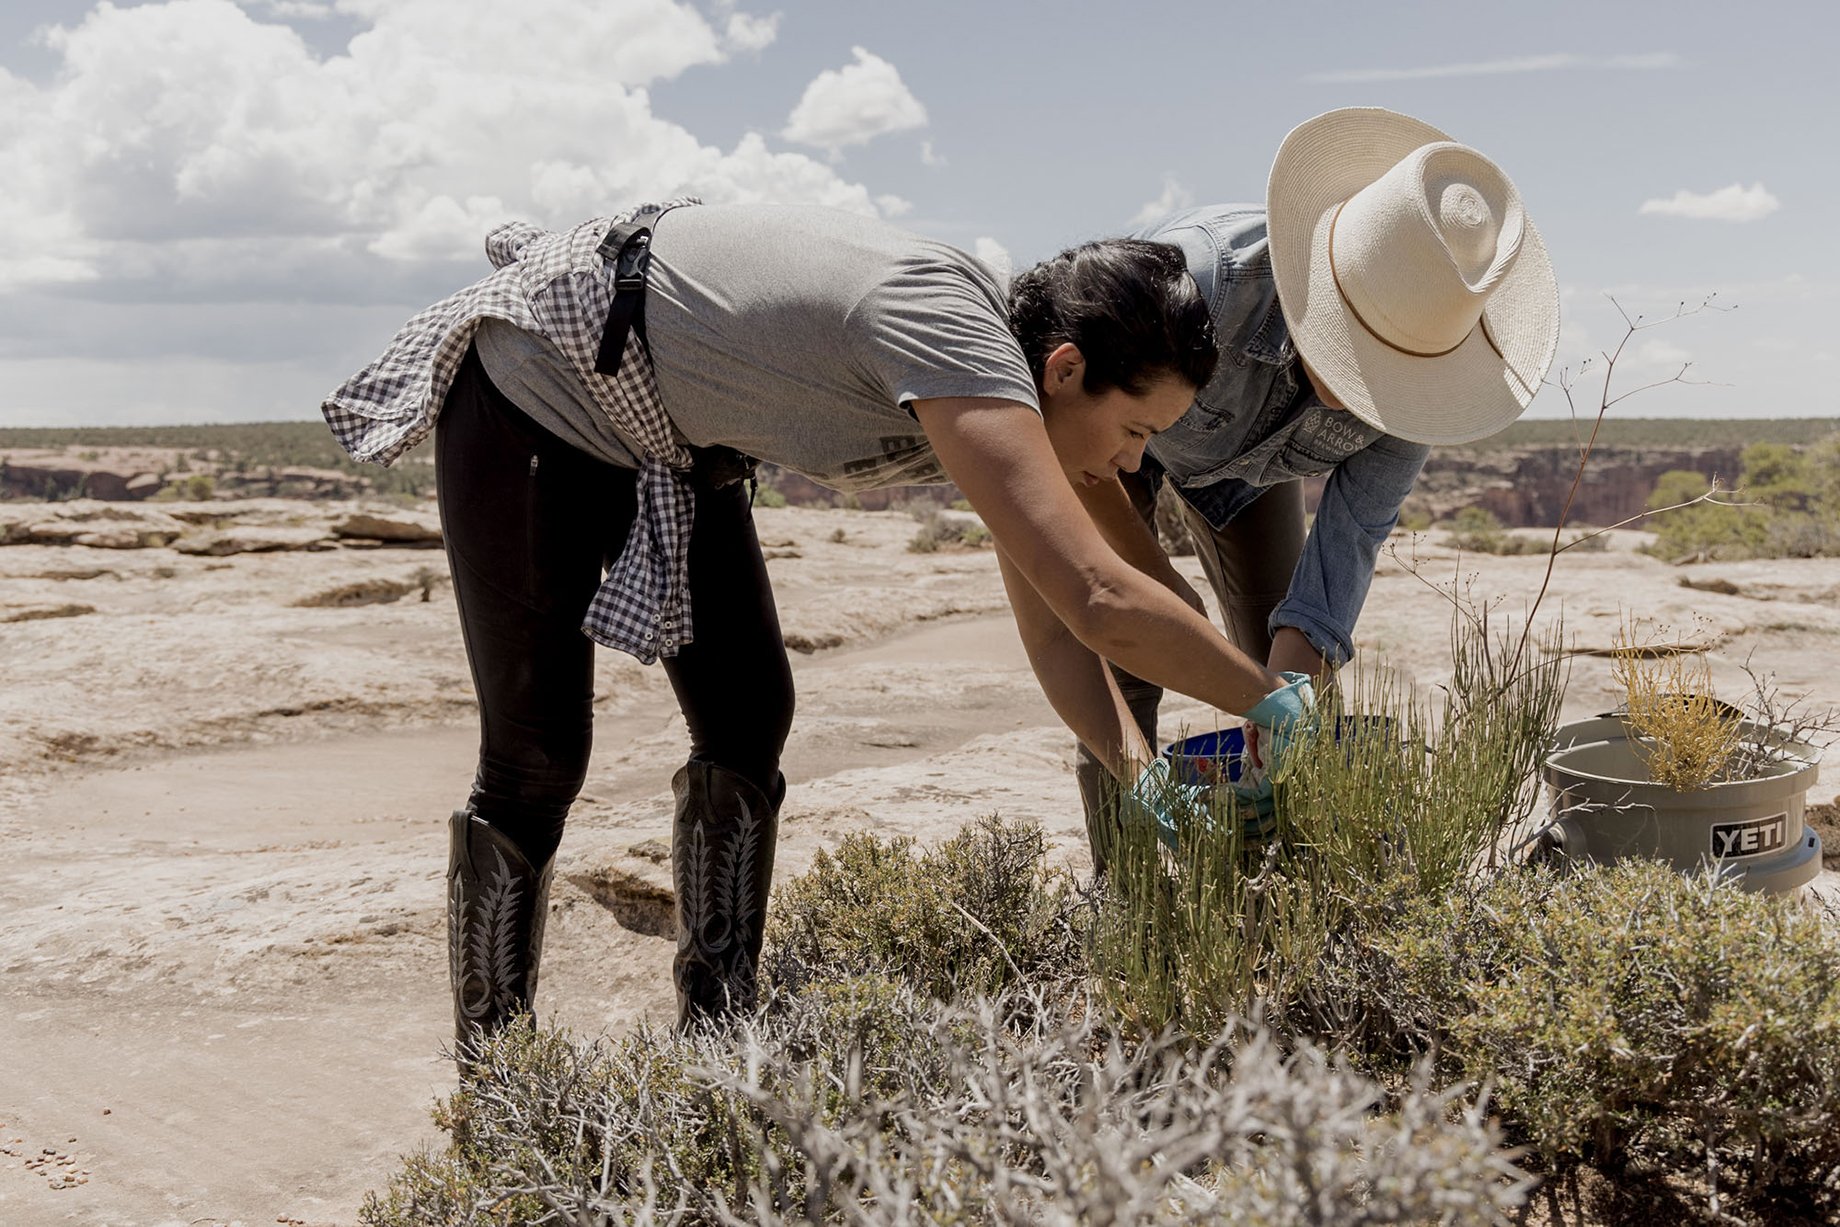 Missy Begay and Shyla Sheppard forage for ingredients in Canyon De Chelly shot by Minesh Bacarina for Outside Magazine